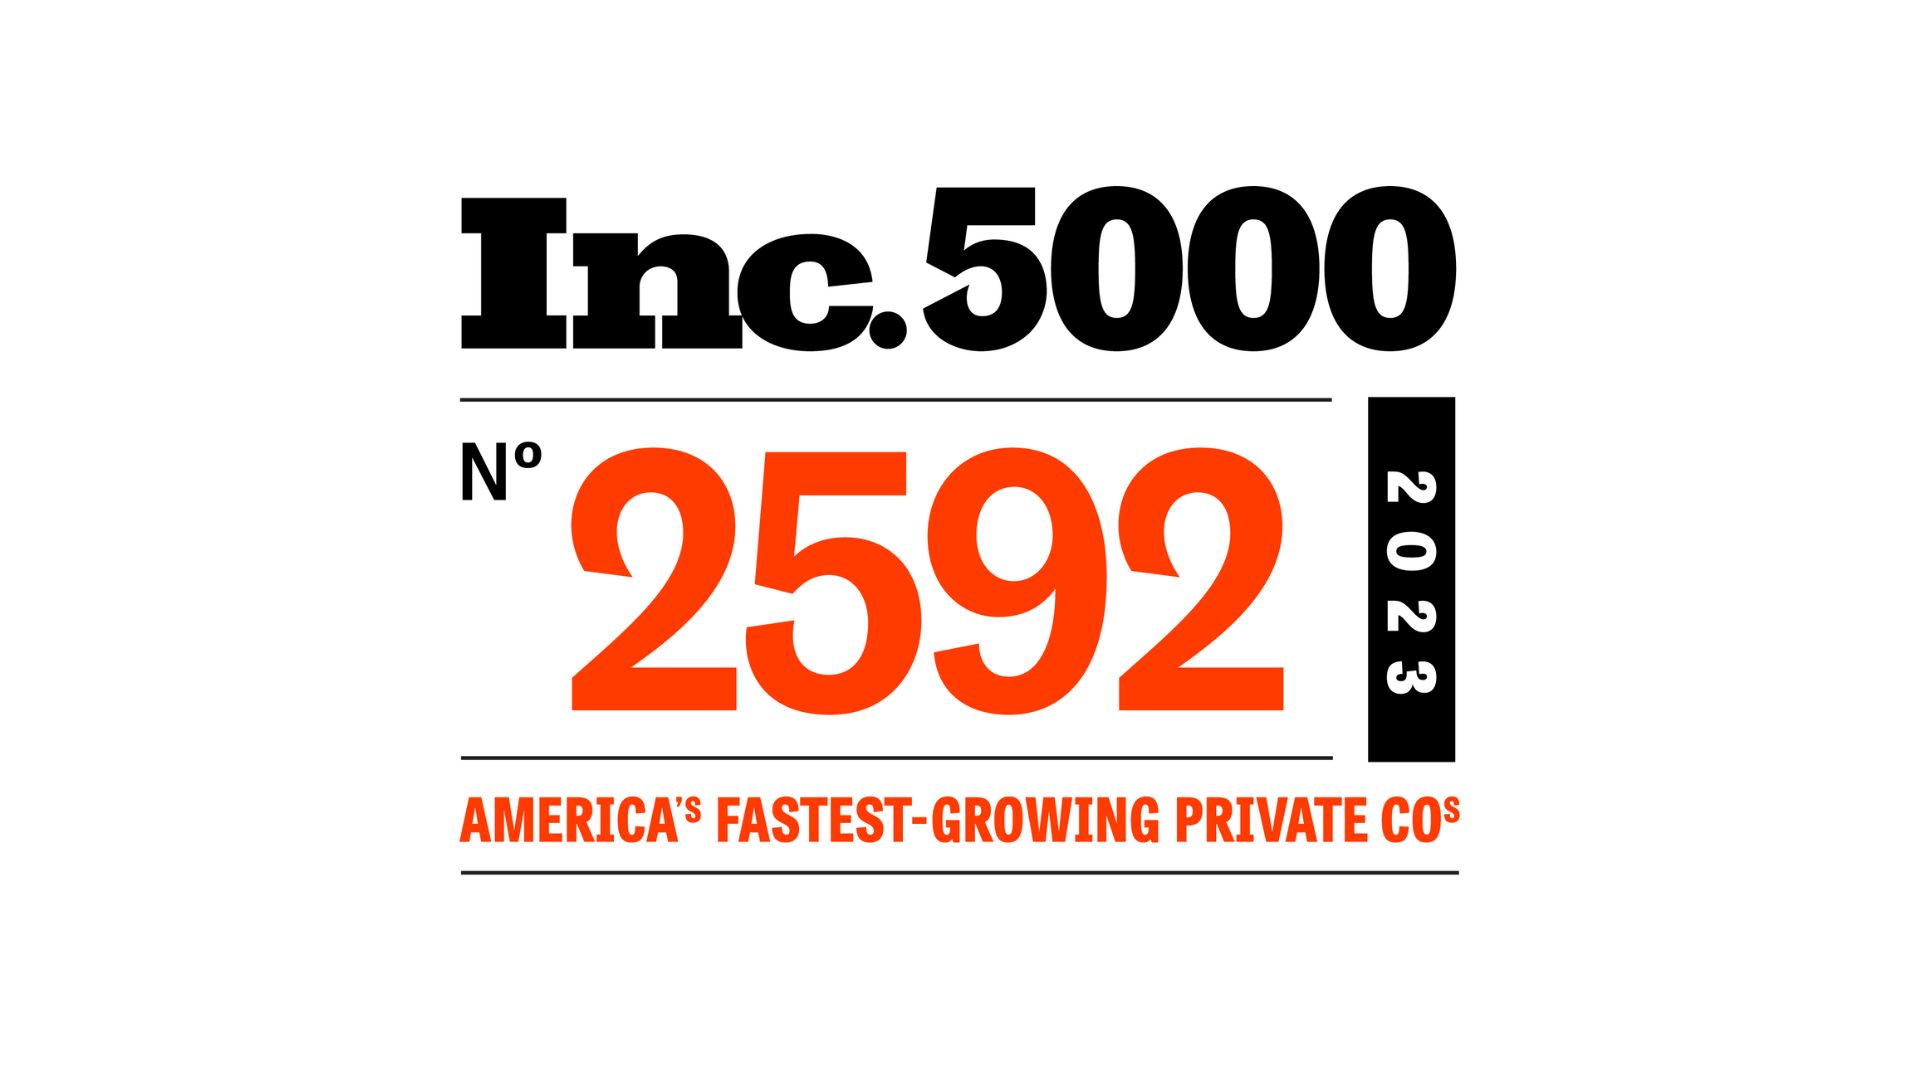 For the fourth straight year, Dental Claim Support lands on the Inc. 5000 list of fastest-growing private companies